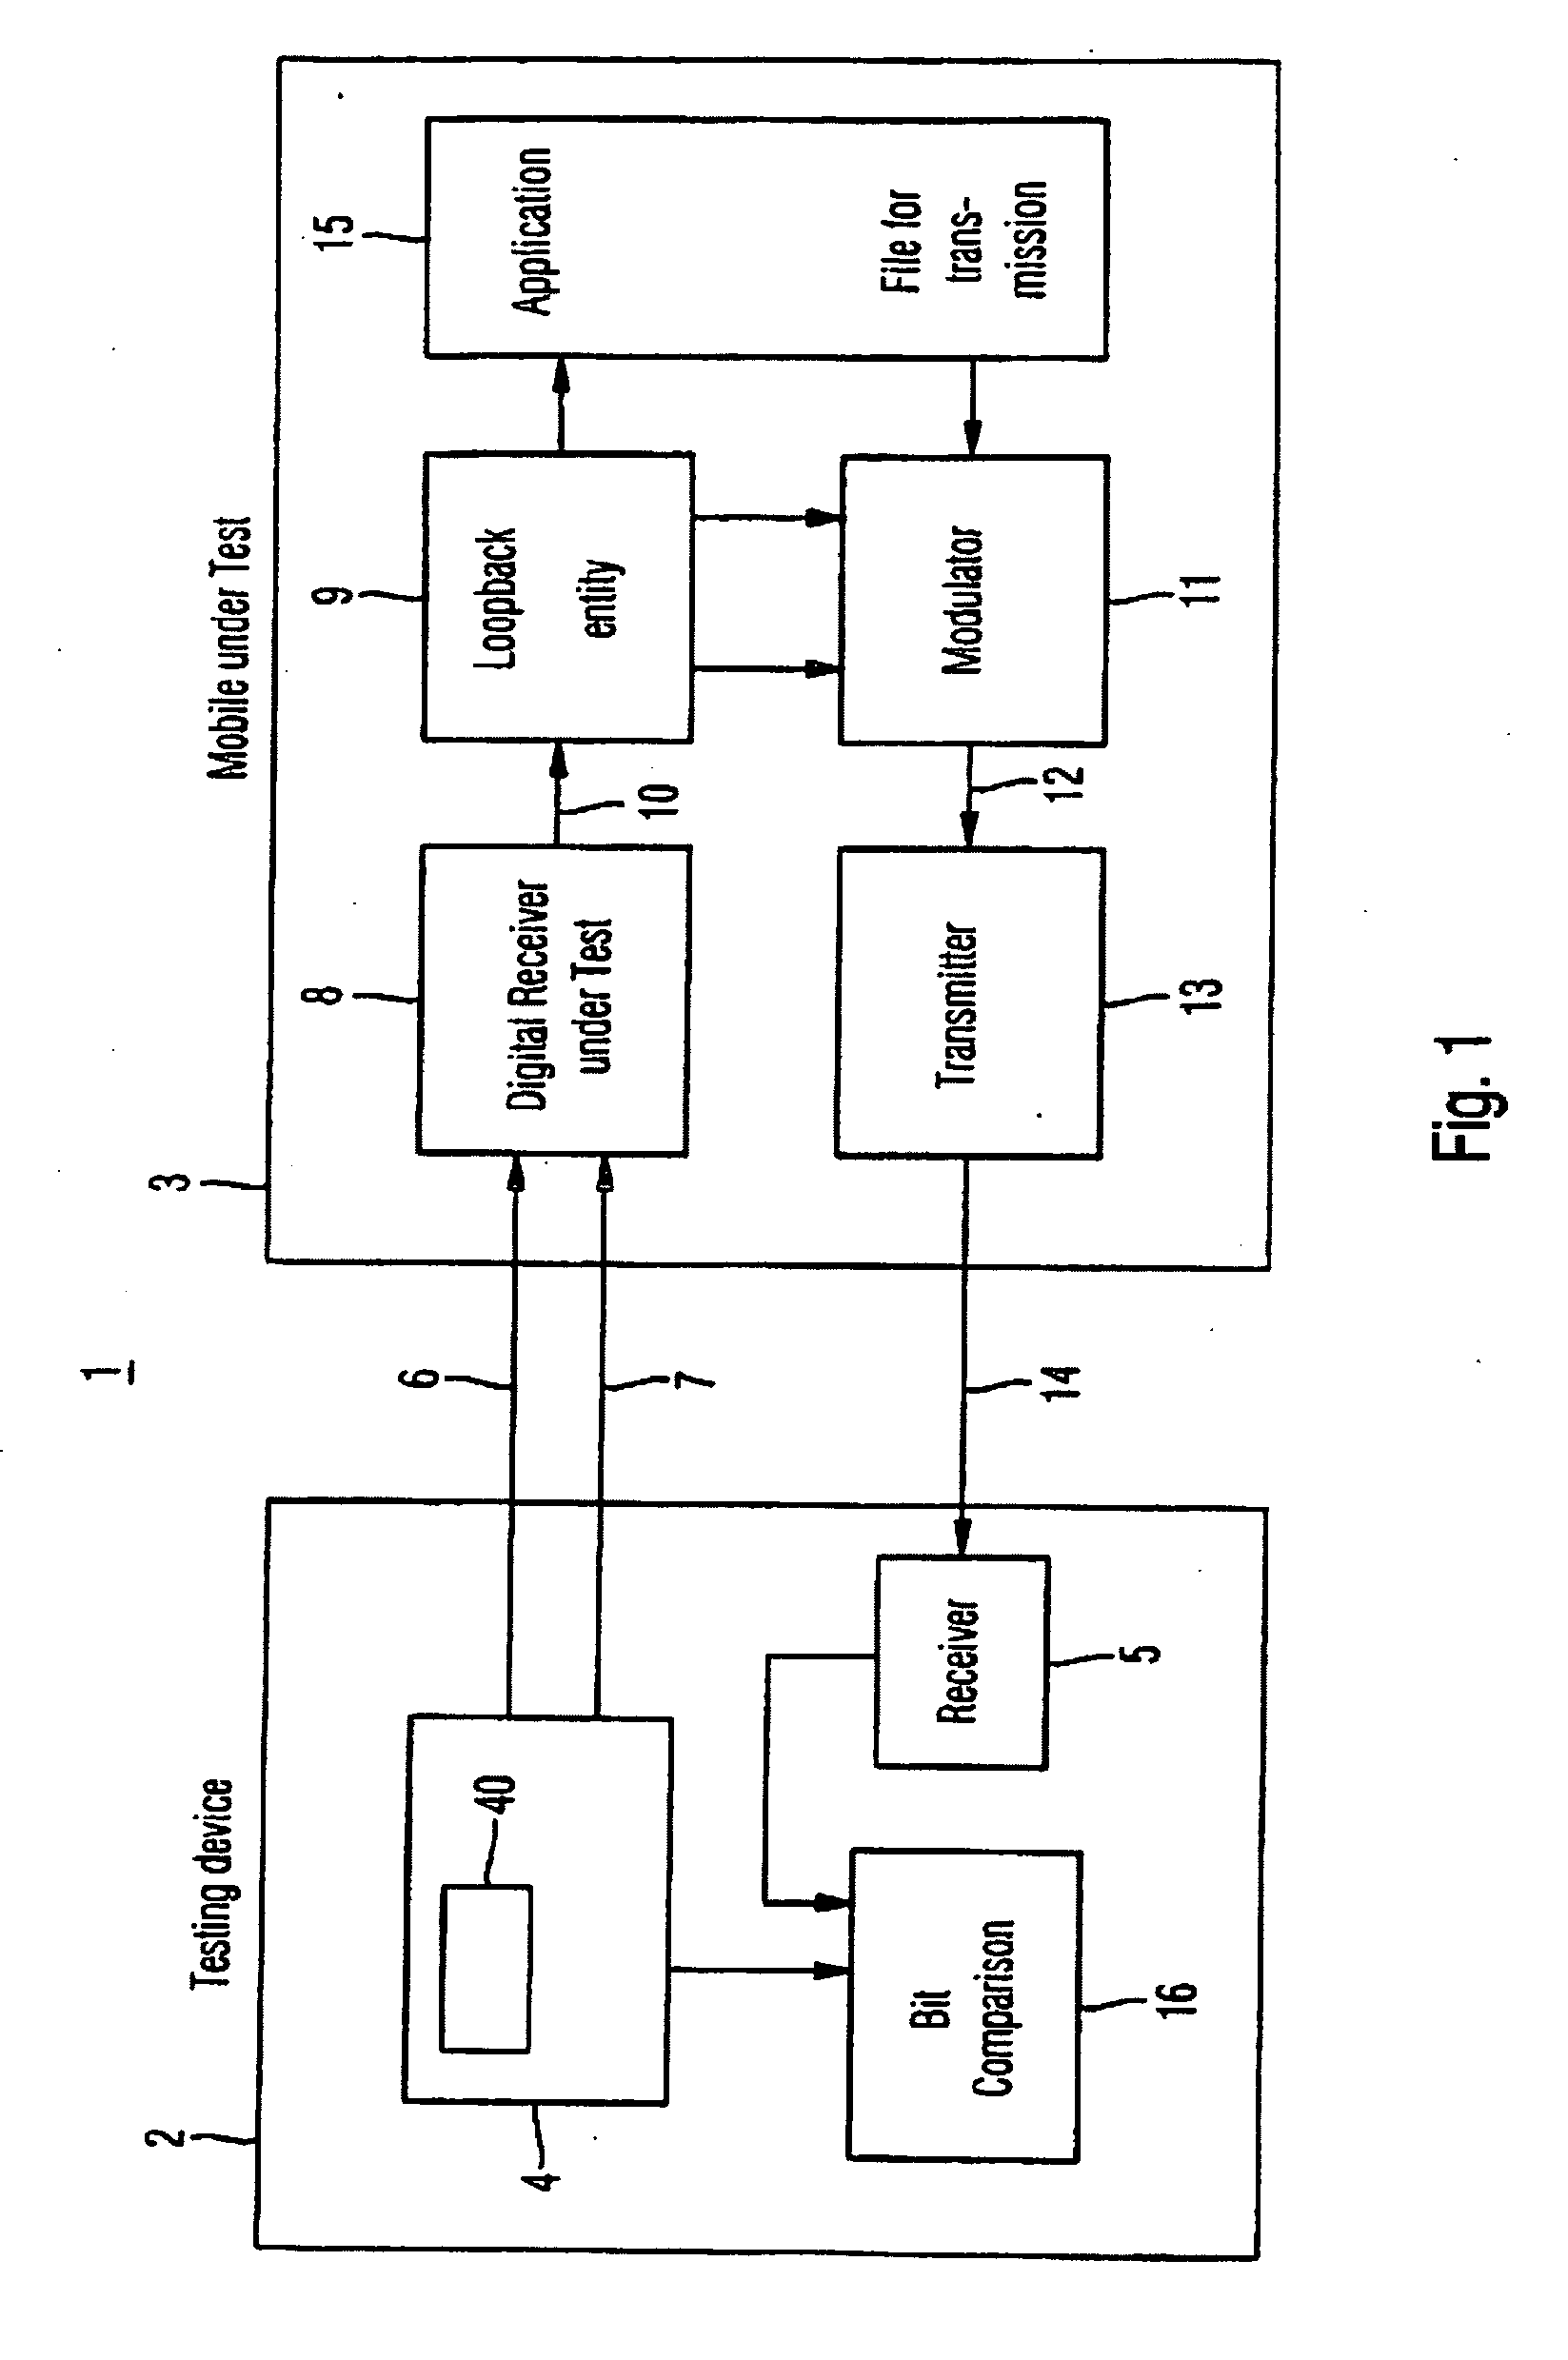 System, mobile communication unit and method for testing a receiver performance